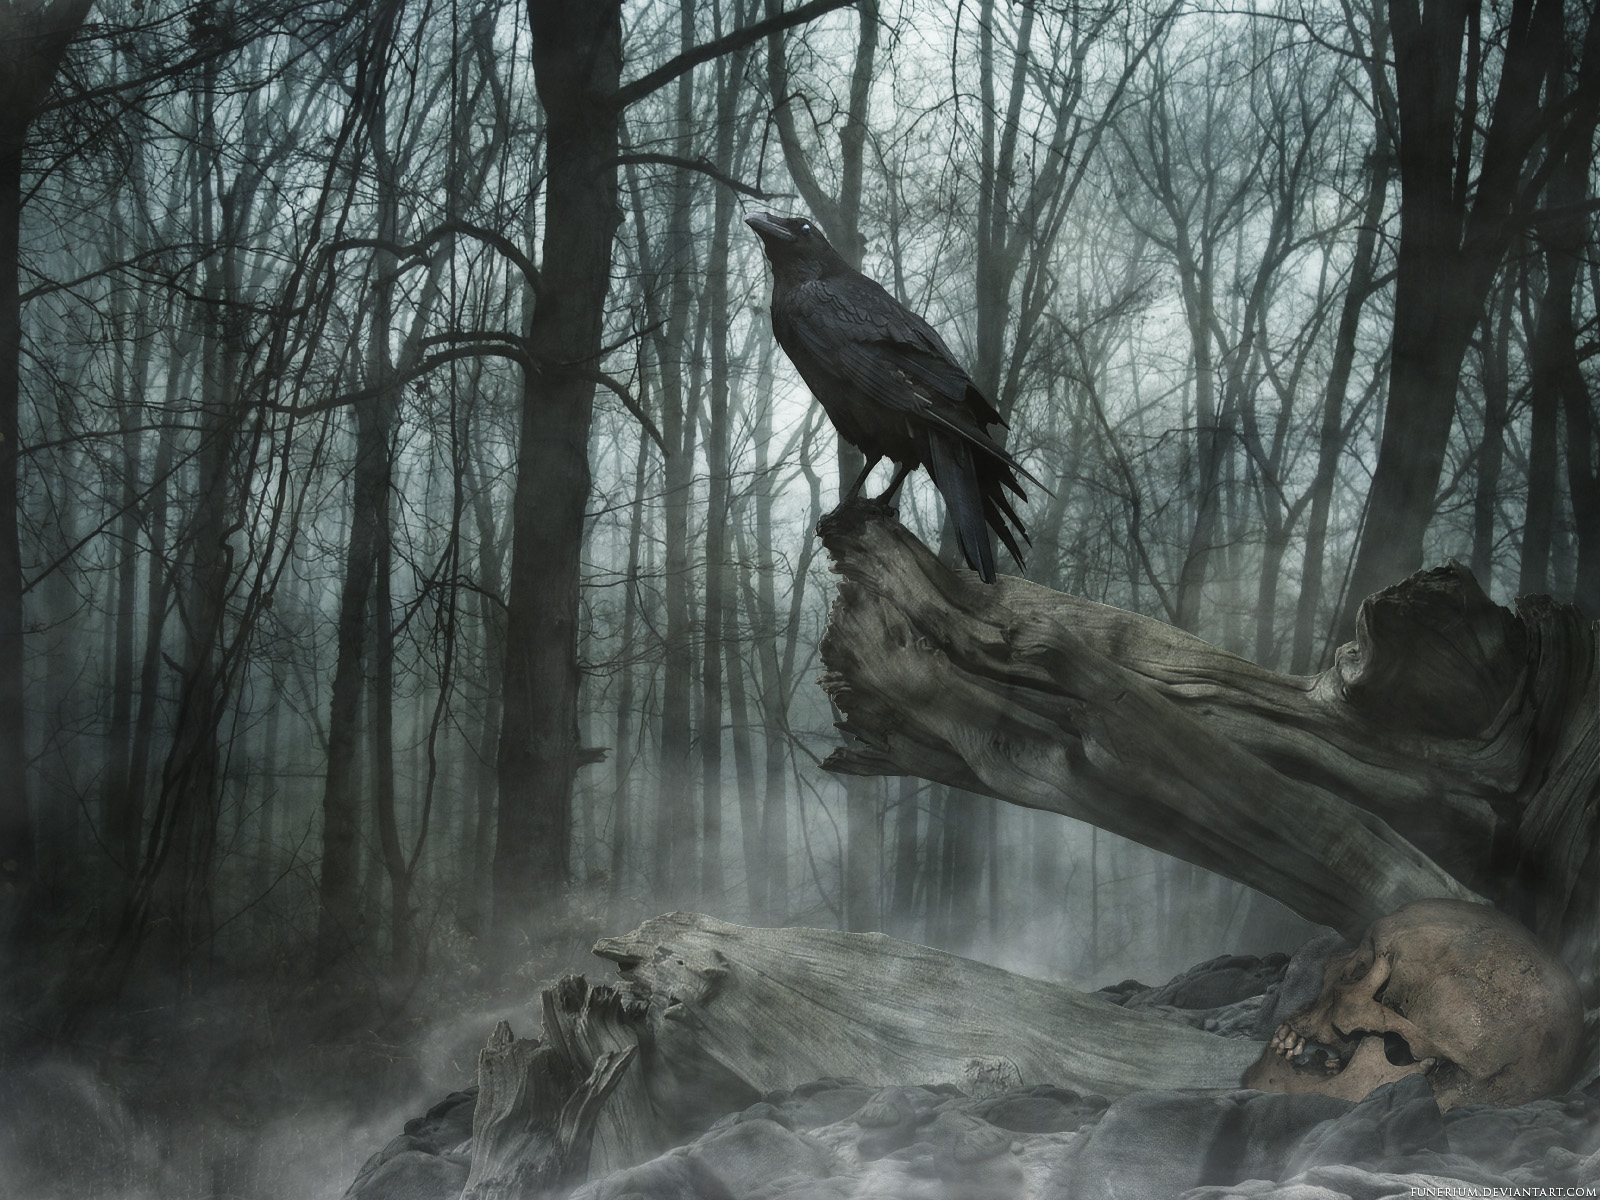 the raven Wallpaper Background 20449 1600x1200